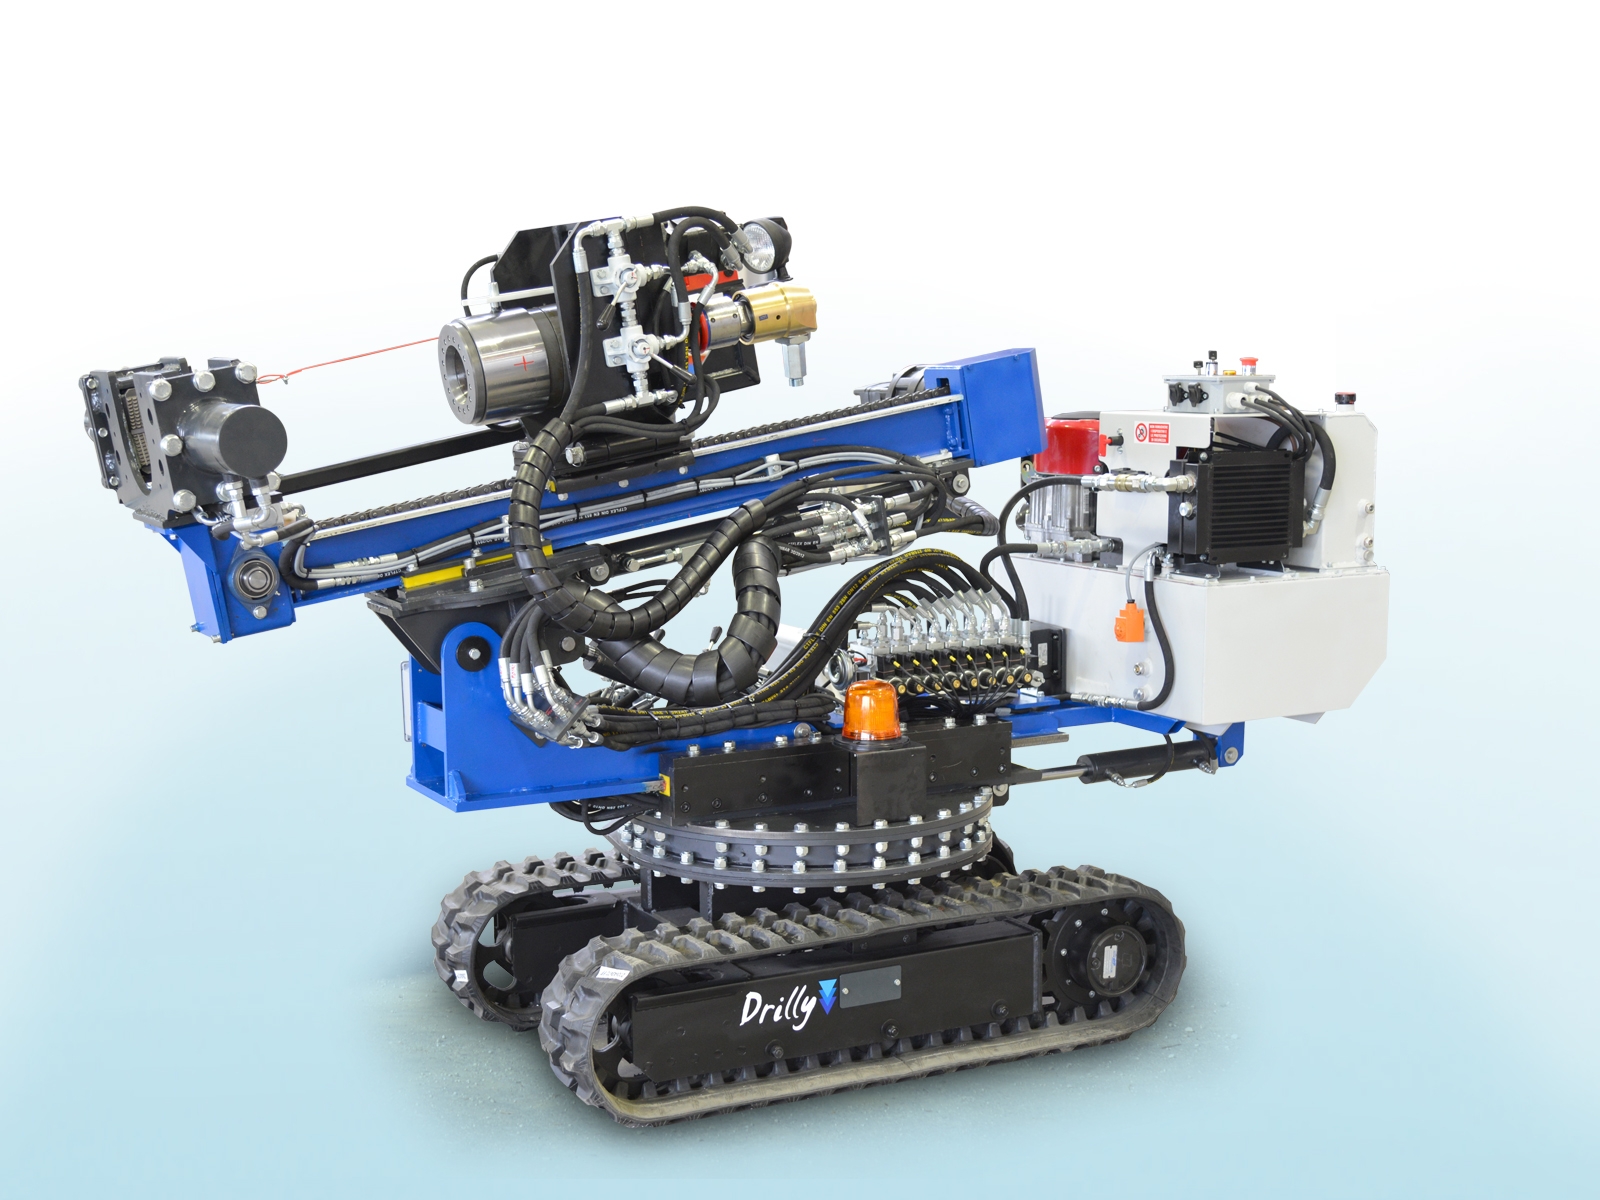 DRILLY – compact self-driving drilling machine